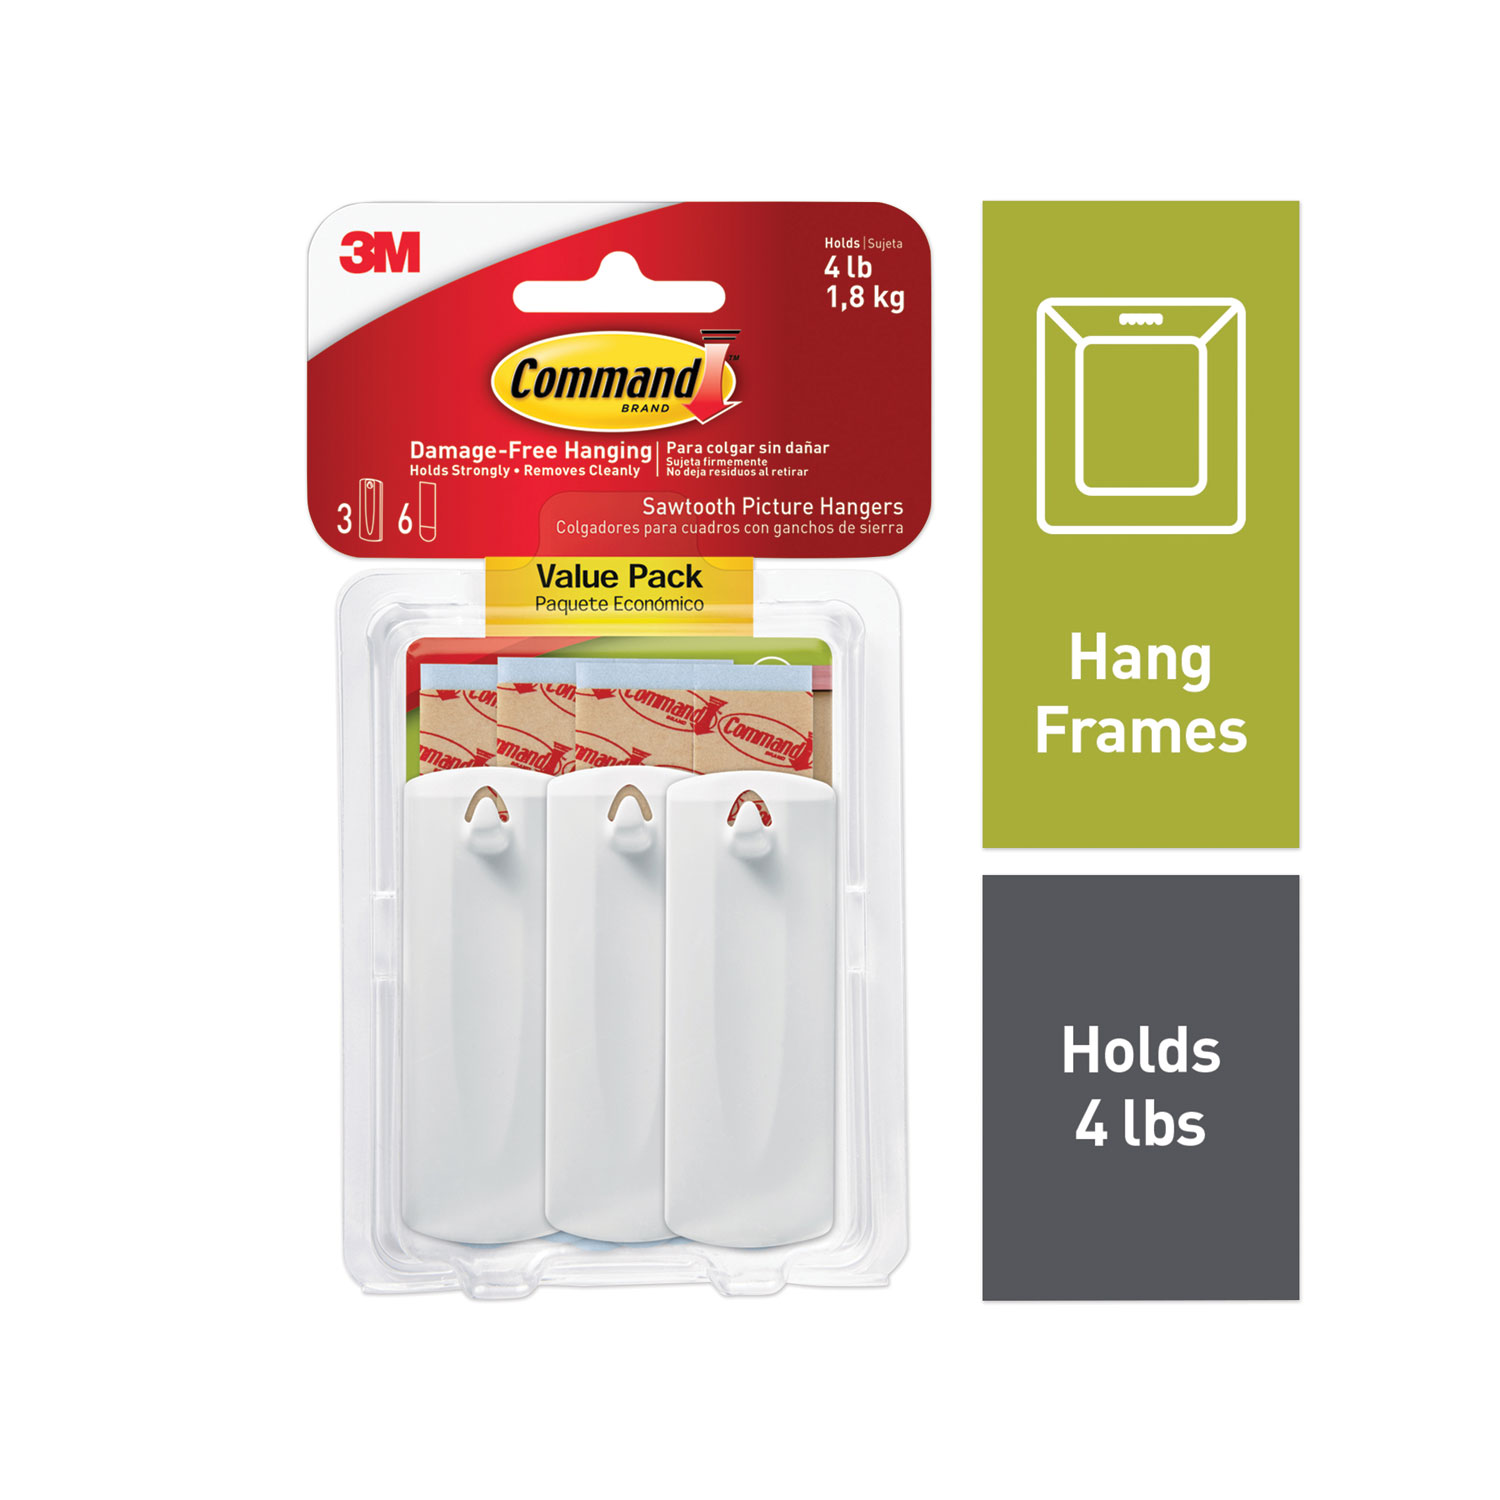  Command 17042 Sawtooth Picture Hanger Value Pack, Large, Plastic, White, 5 lb Capacity, 3 Hooks and 6 Strips/Pack (MMM70005152858) 